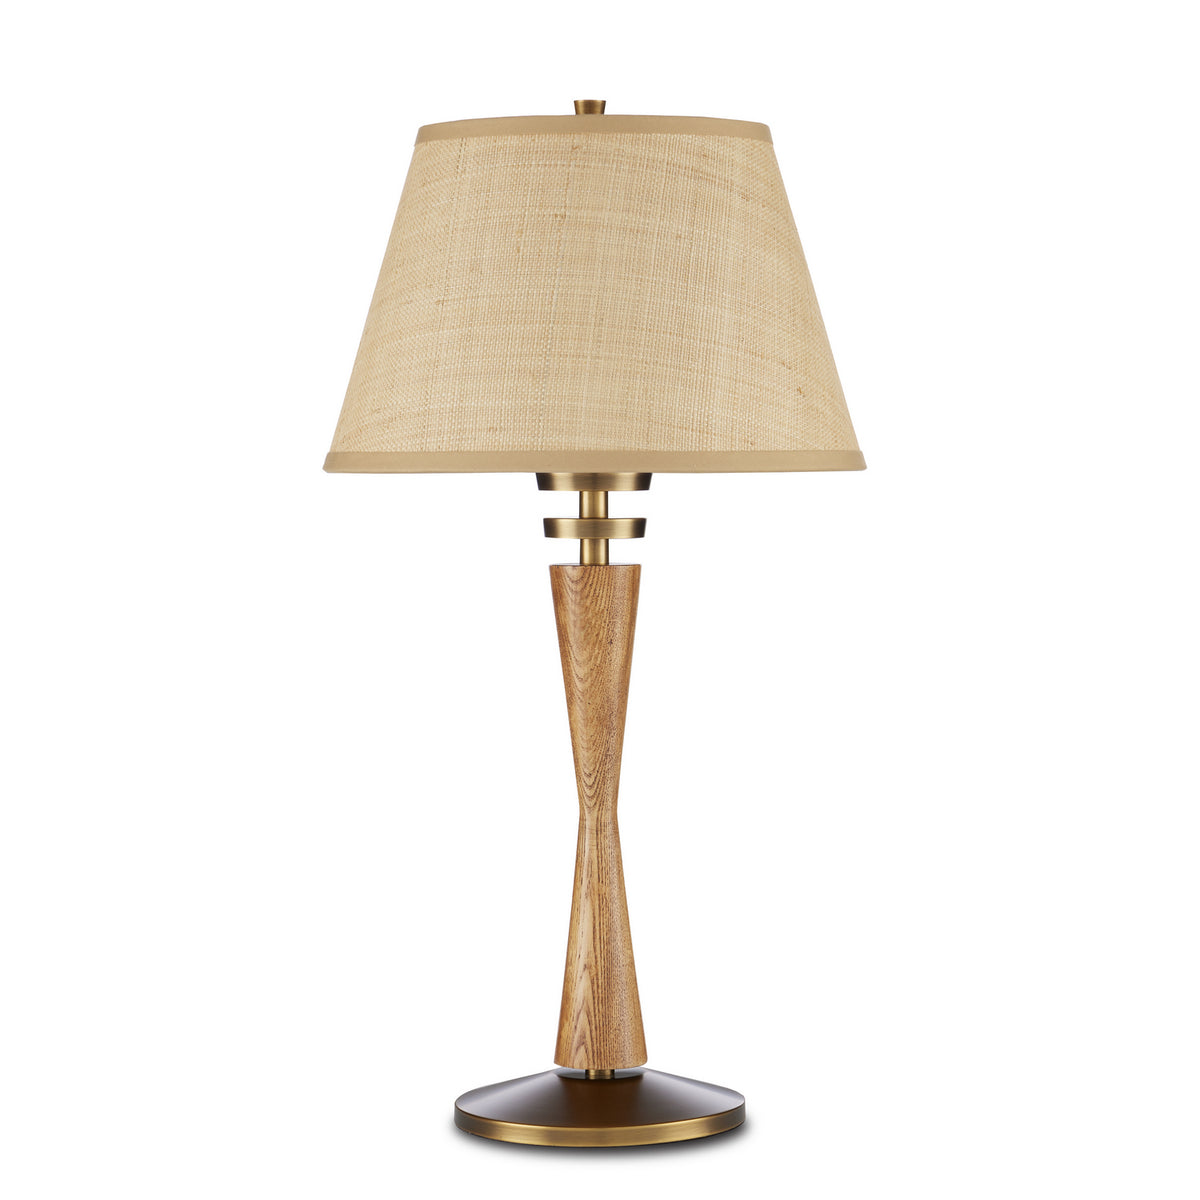 Currey and Company - 6000-0838 - One Light Table Lamp - Woodville - Classic Honey/Antique Brass